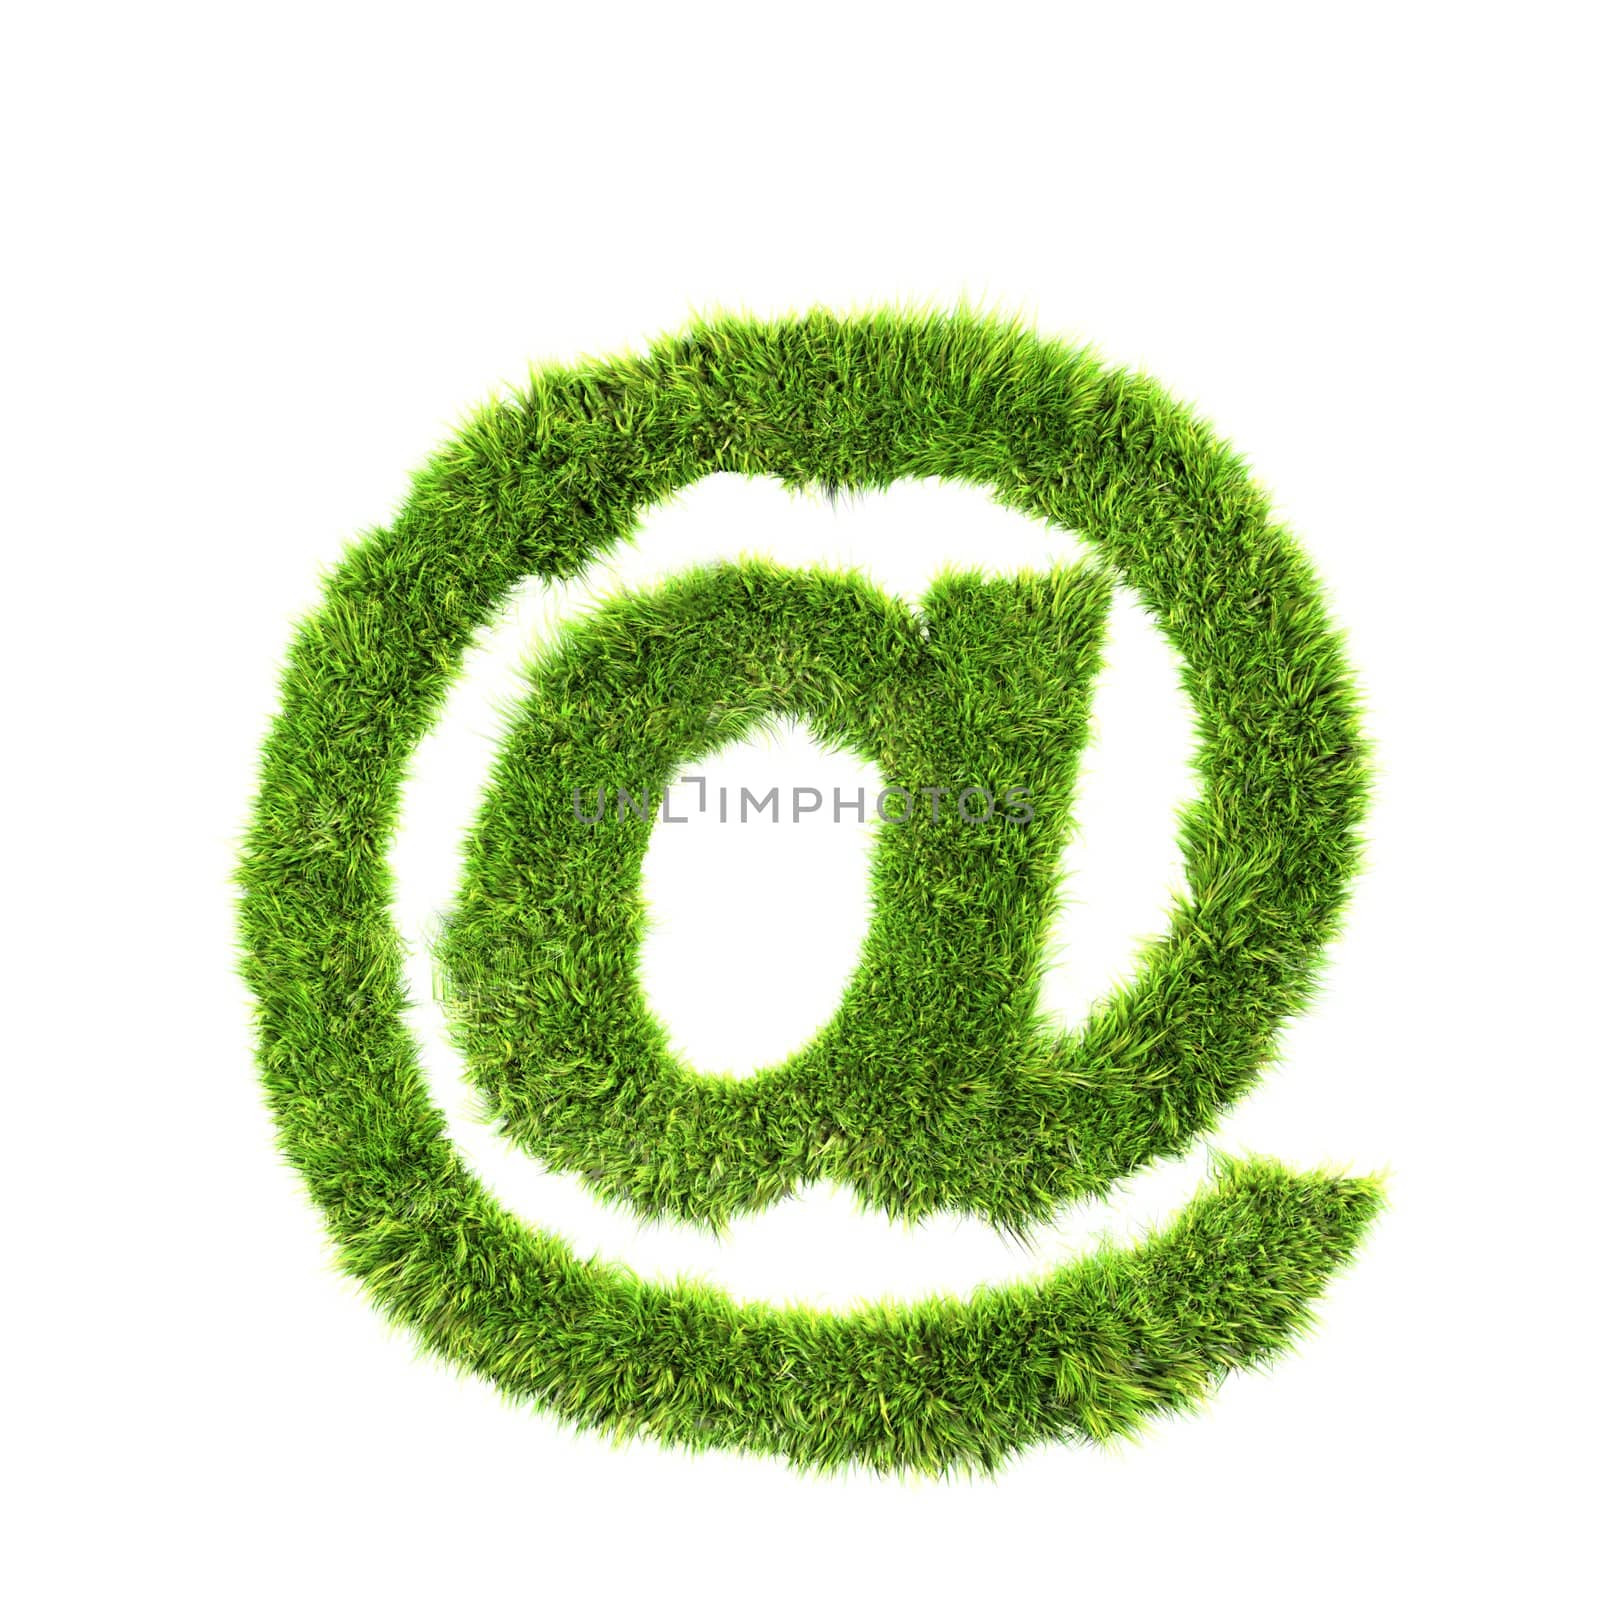 3d grass sign isolated on white background - arobas